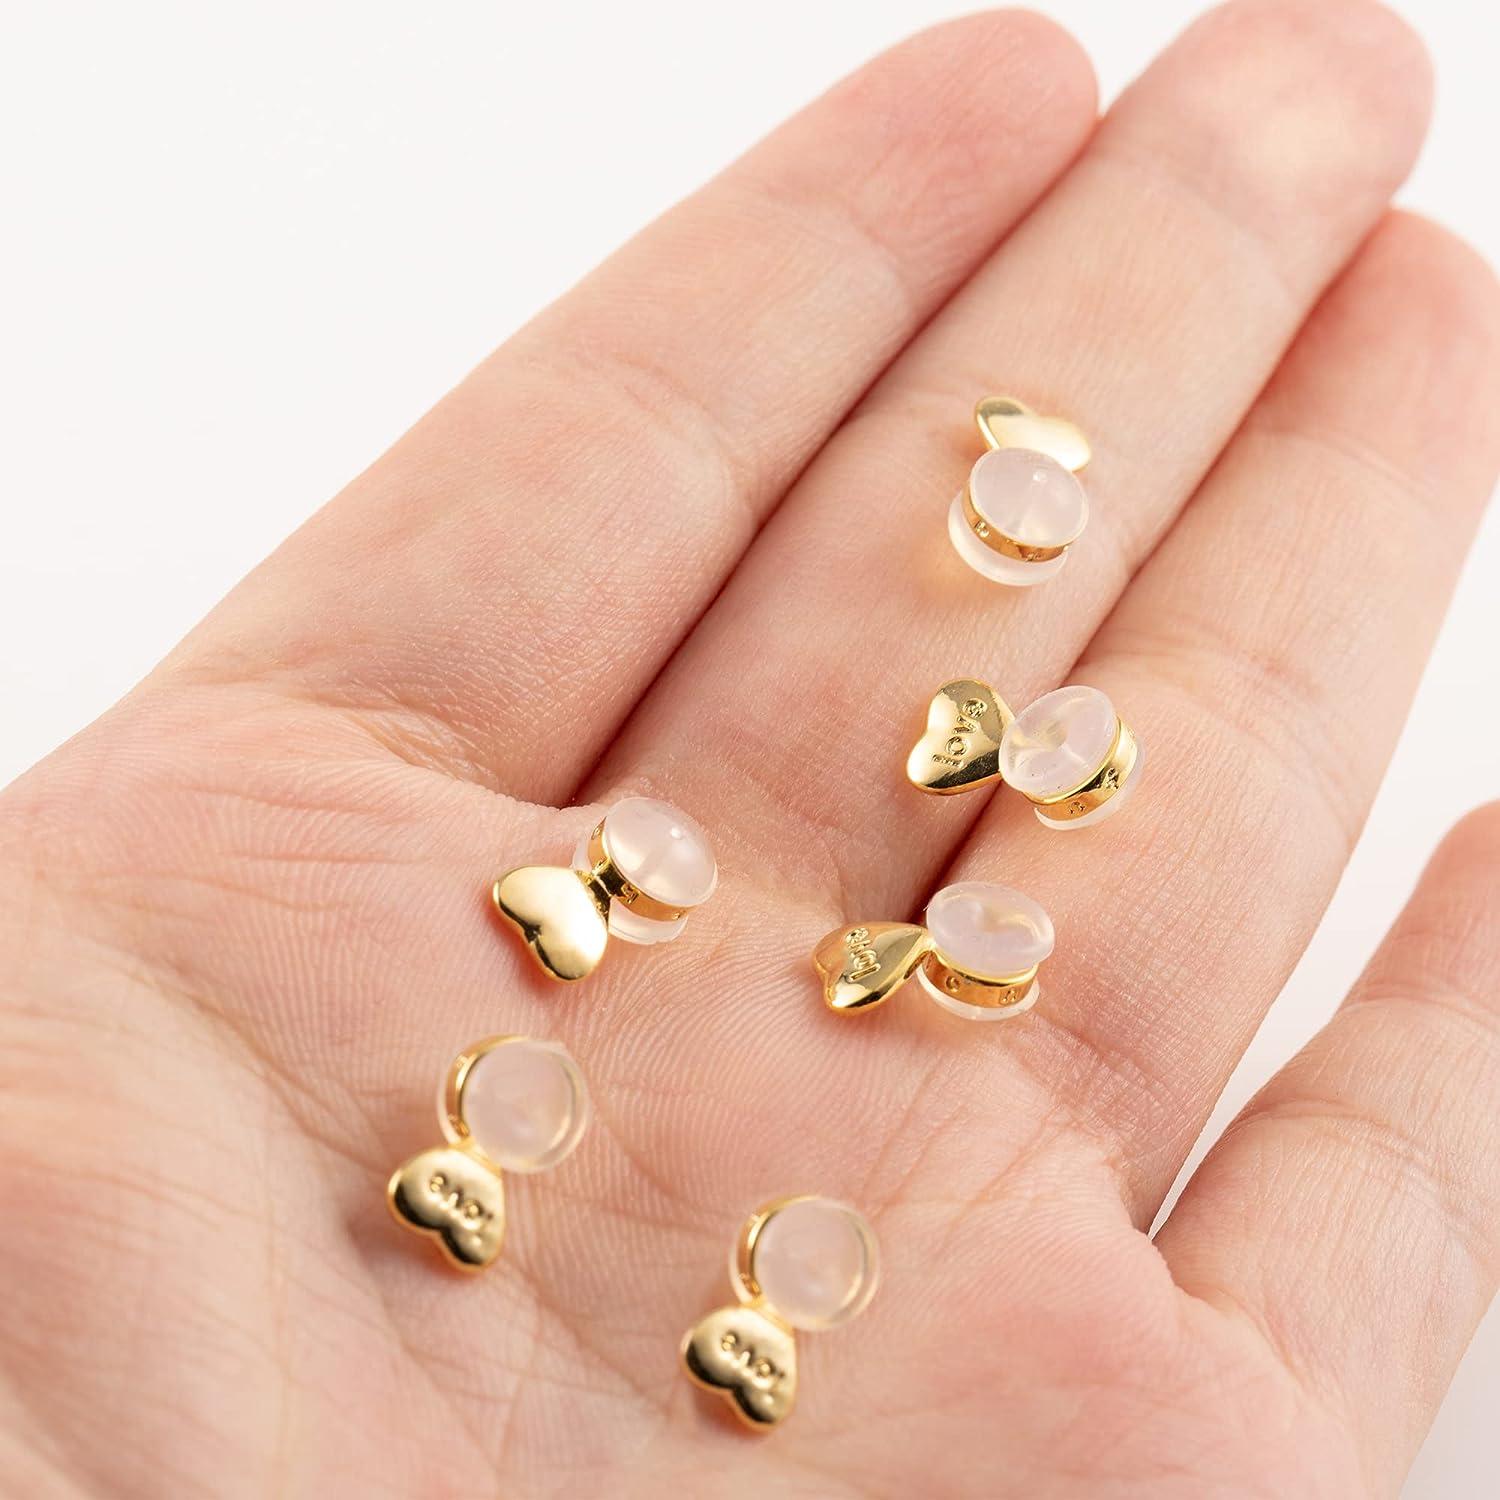 10 Pcs/5 Pairs Earring Backs for Studs, Droopy Ears and Heavy